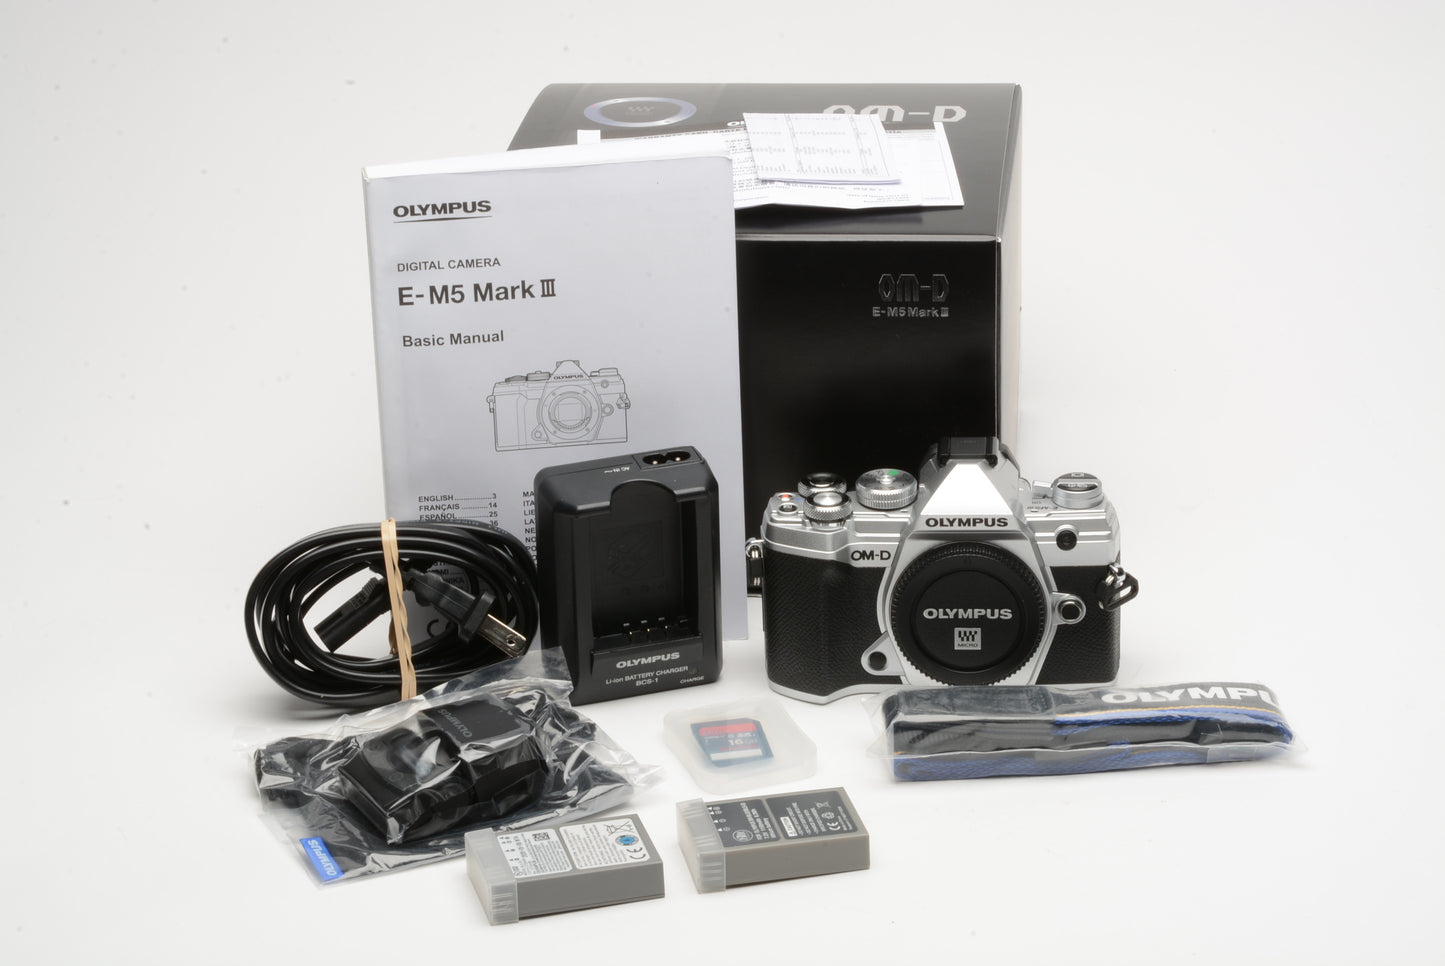 Olympus OM-D E-M5 Marl III Silver Body, Boxed, 2batts, charger, flash, 16GB SD ++++++